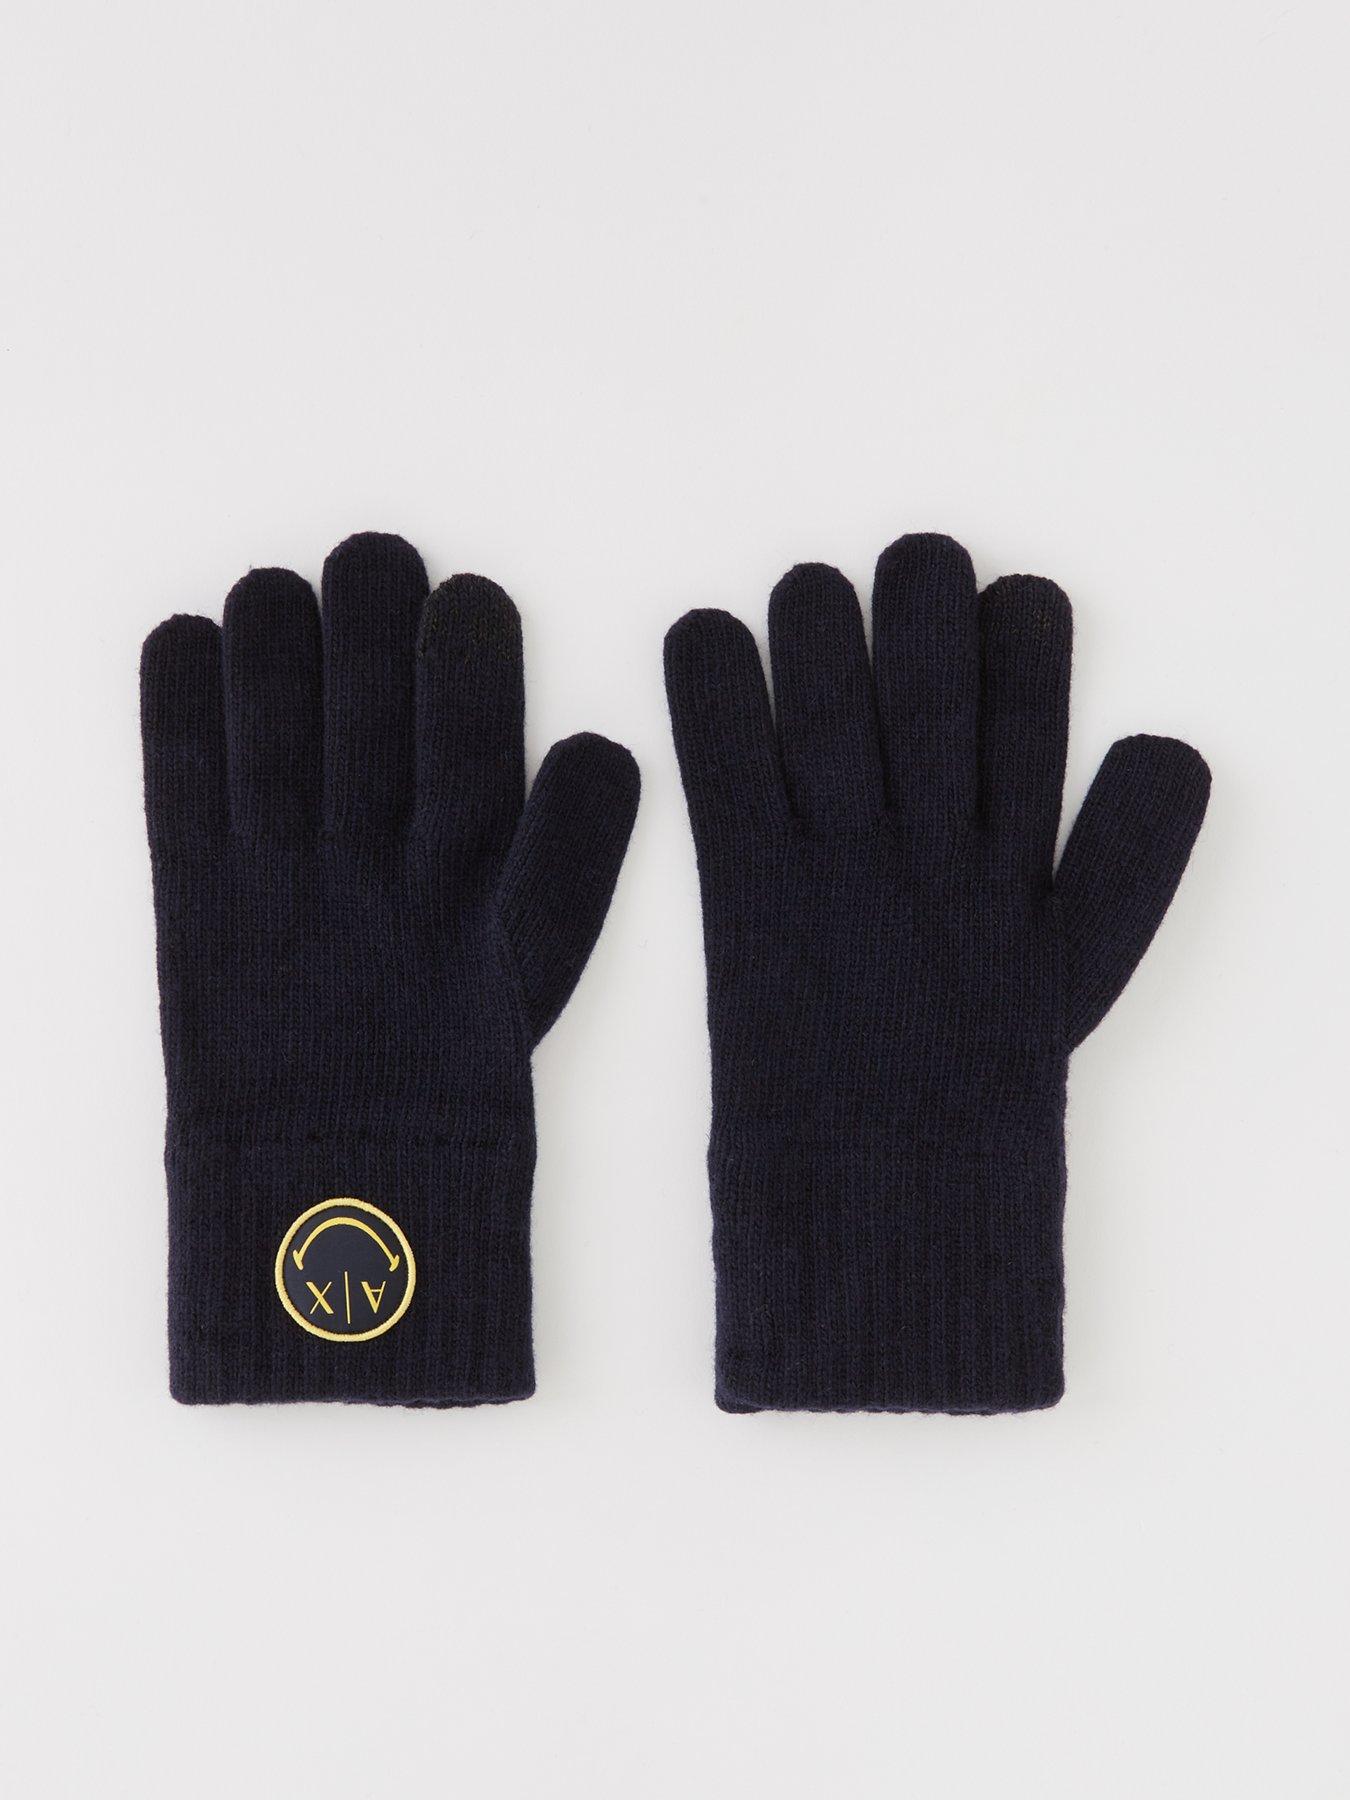 Armani Exchange Ax X Smiley Face Knitted Gloves - Black 